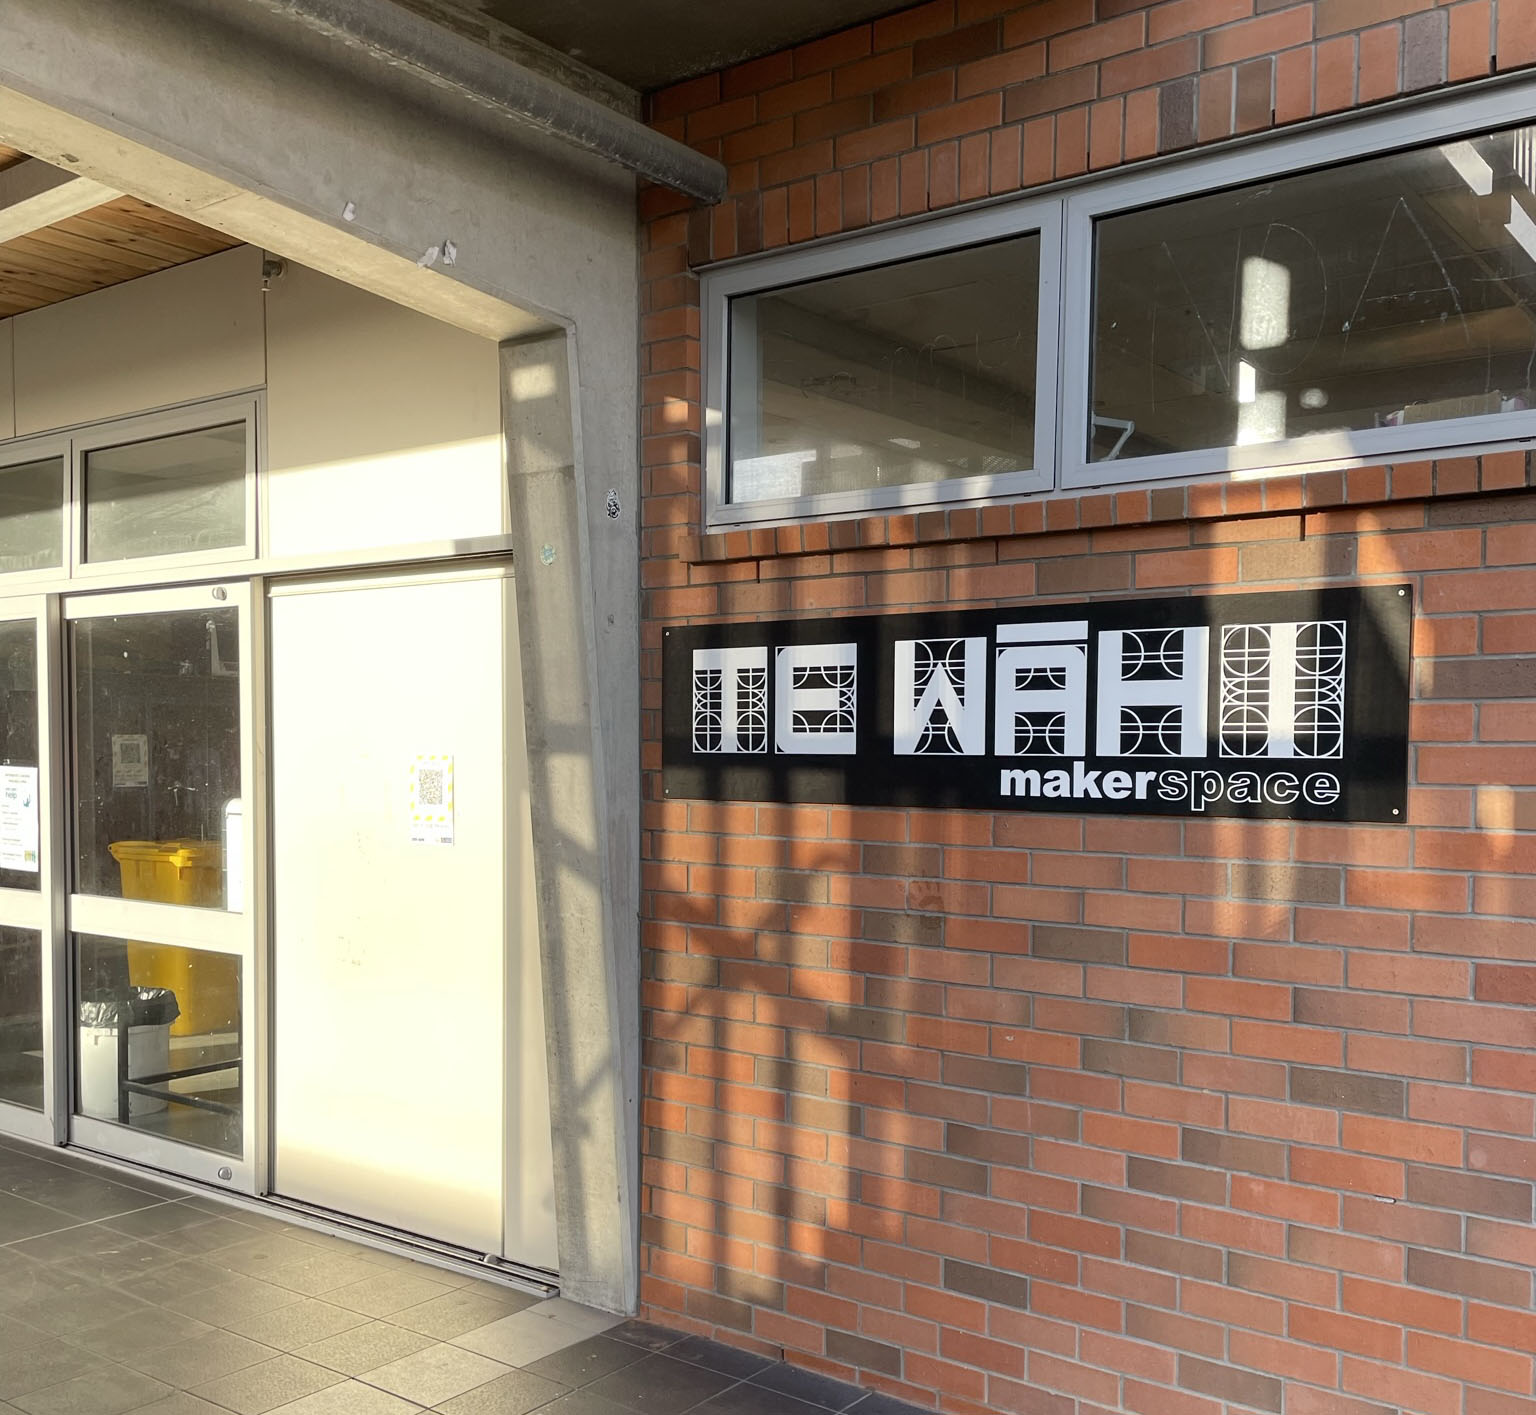 Entrance of the Te Wāhi maker space, showing a monochrome sign on a brick wall.